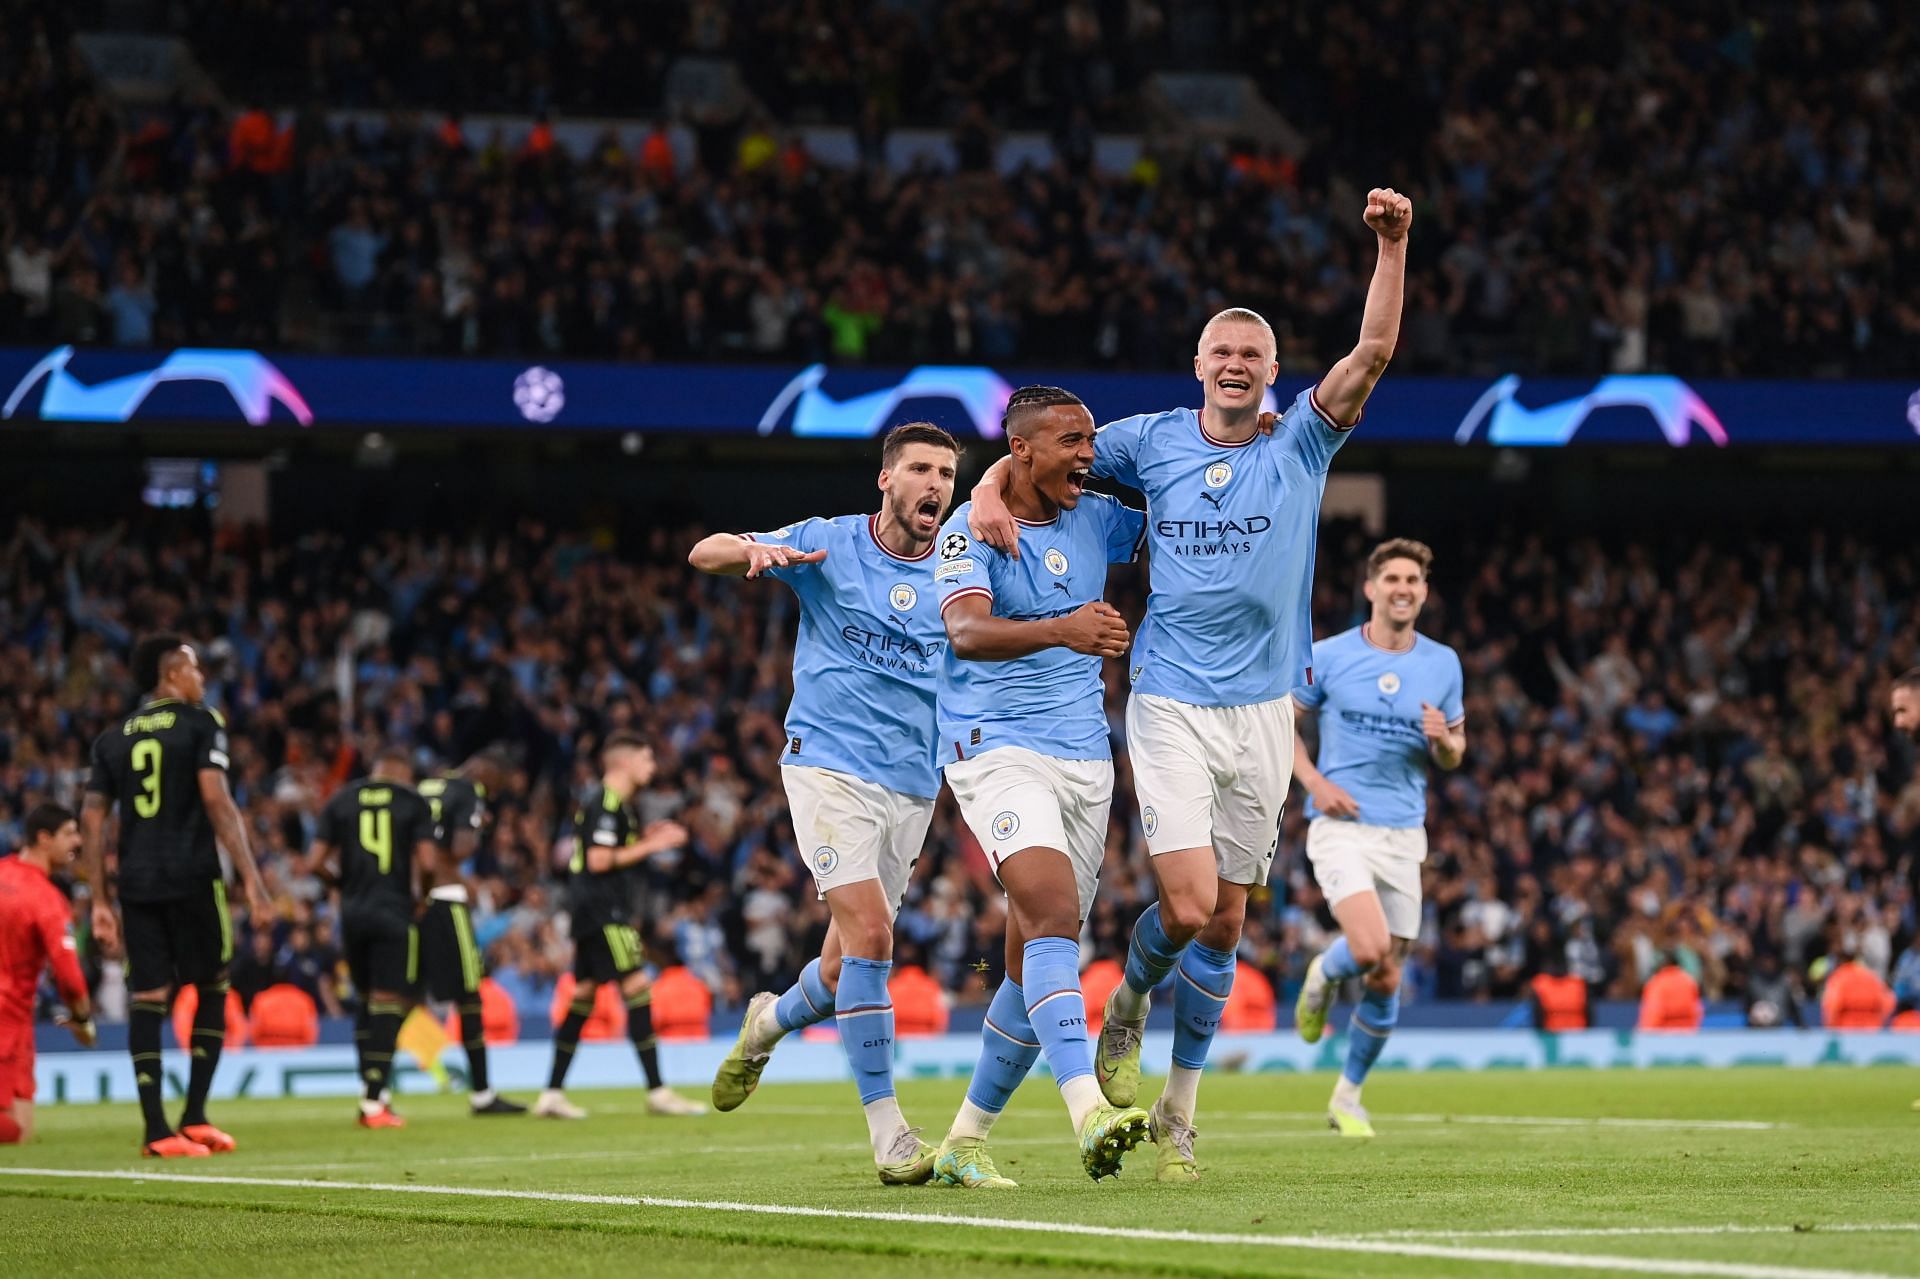 Three talking points ahead of Manchester City vs Real Madrid